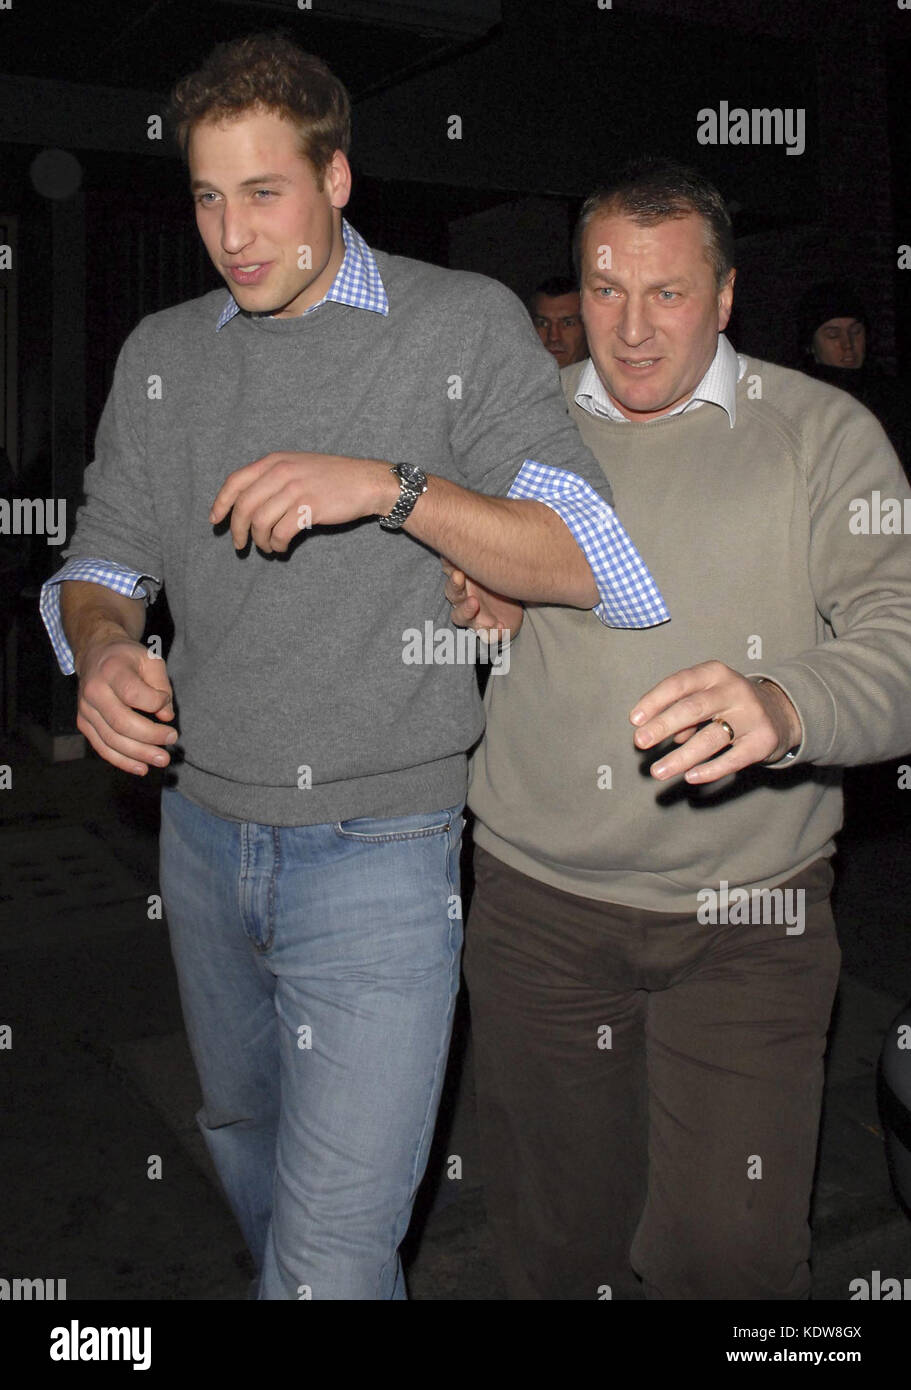 Prince William and Kate Middleton enjoyed a night out at the Mahiki Club in Mayfair. They left the club separately, William left first and Kate and a friend left a little later in a taxi! UK, 01/02/2007       People:  Kate Middleton Prince William   Credit: Hoo-Me.com/MediaPunch ***NO UK*** Stock Photo